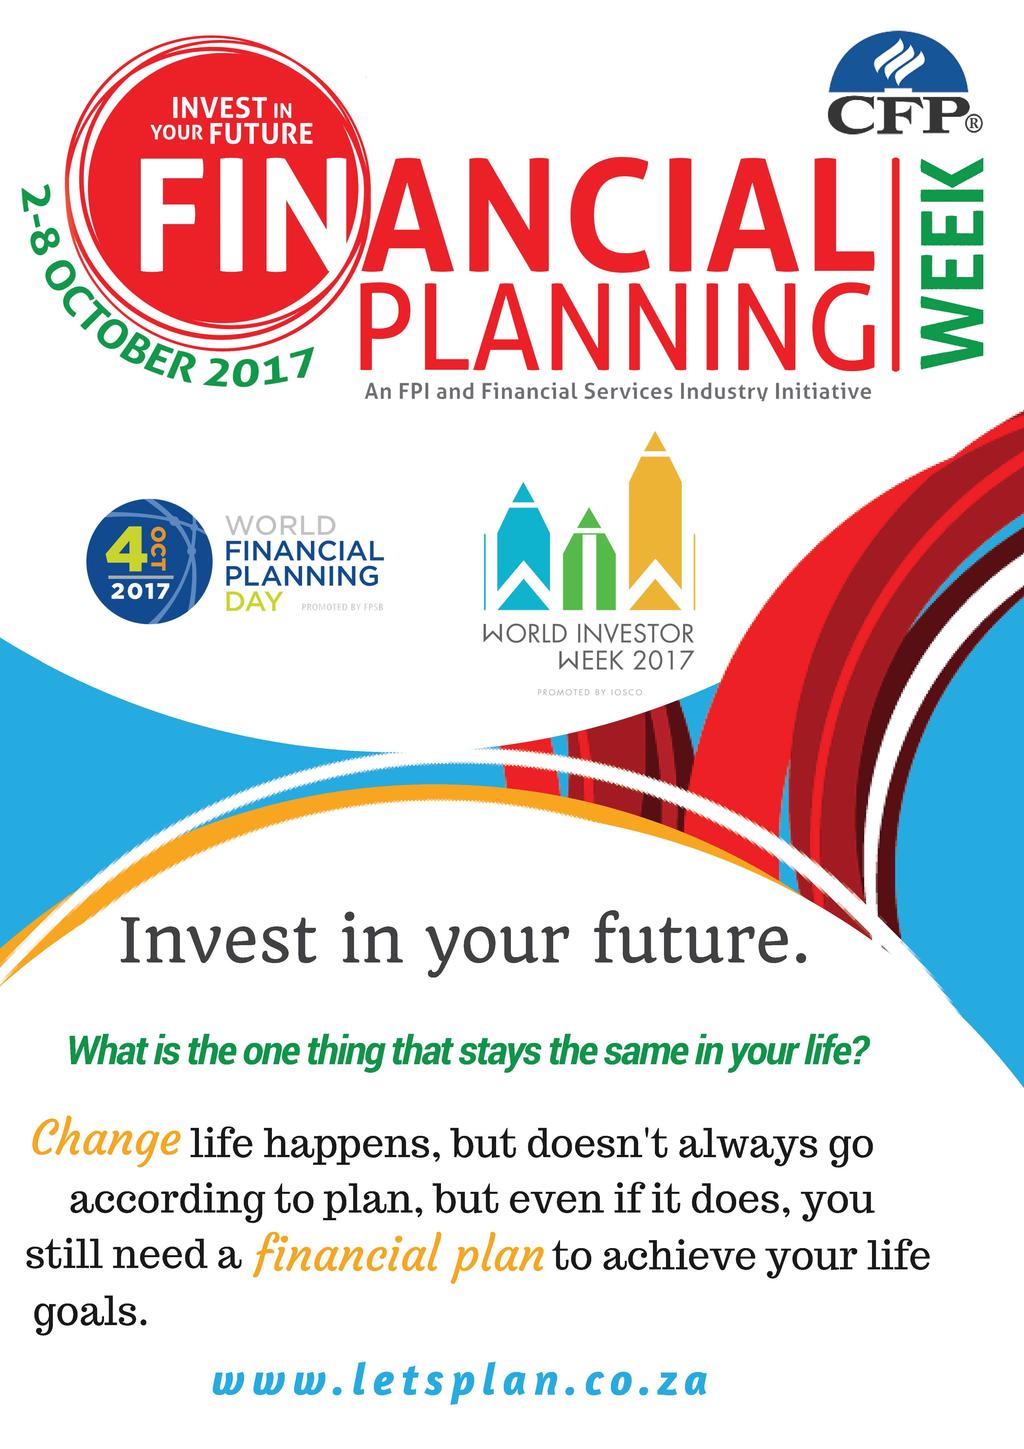 CONSUMER COMMUNICATION - POSTER Posters can be used to create more awareness around the Financial Planning Week initiative.